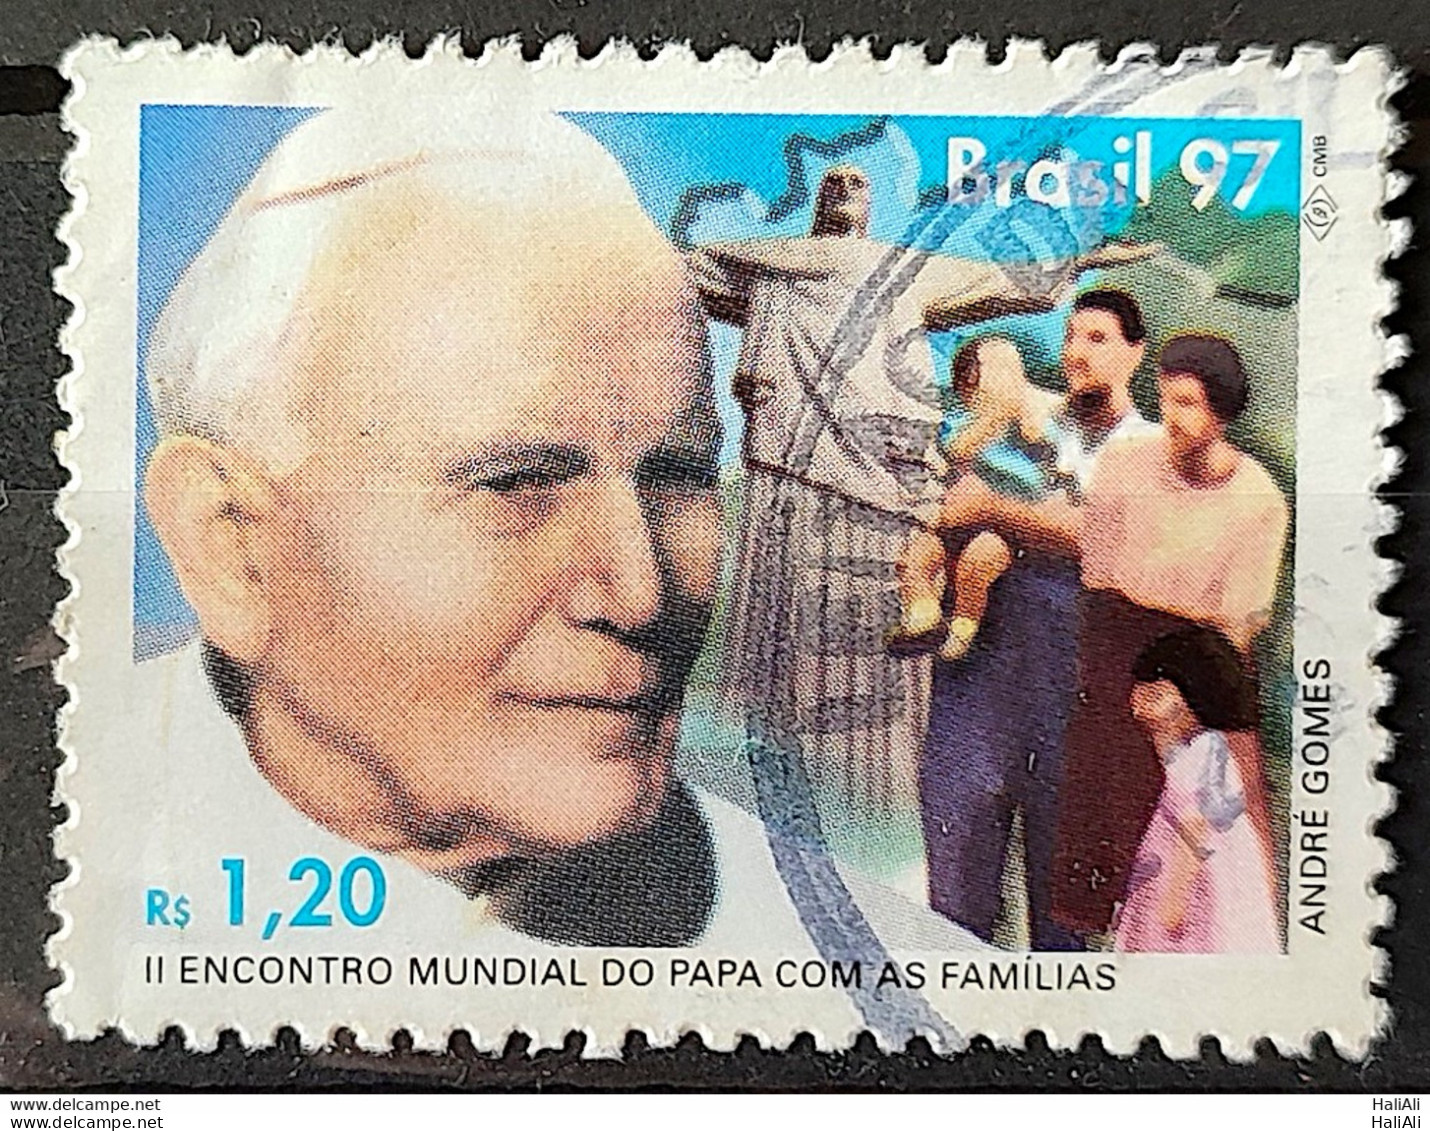 C 2043 Brazil Stamp World Pope Meeting With Families Religion 1997 Circulated 8 - Usati